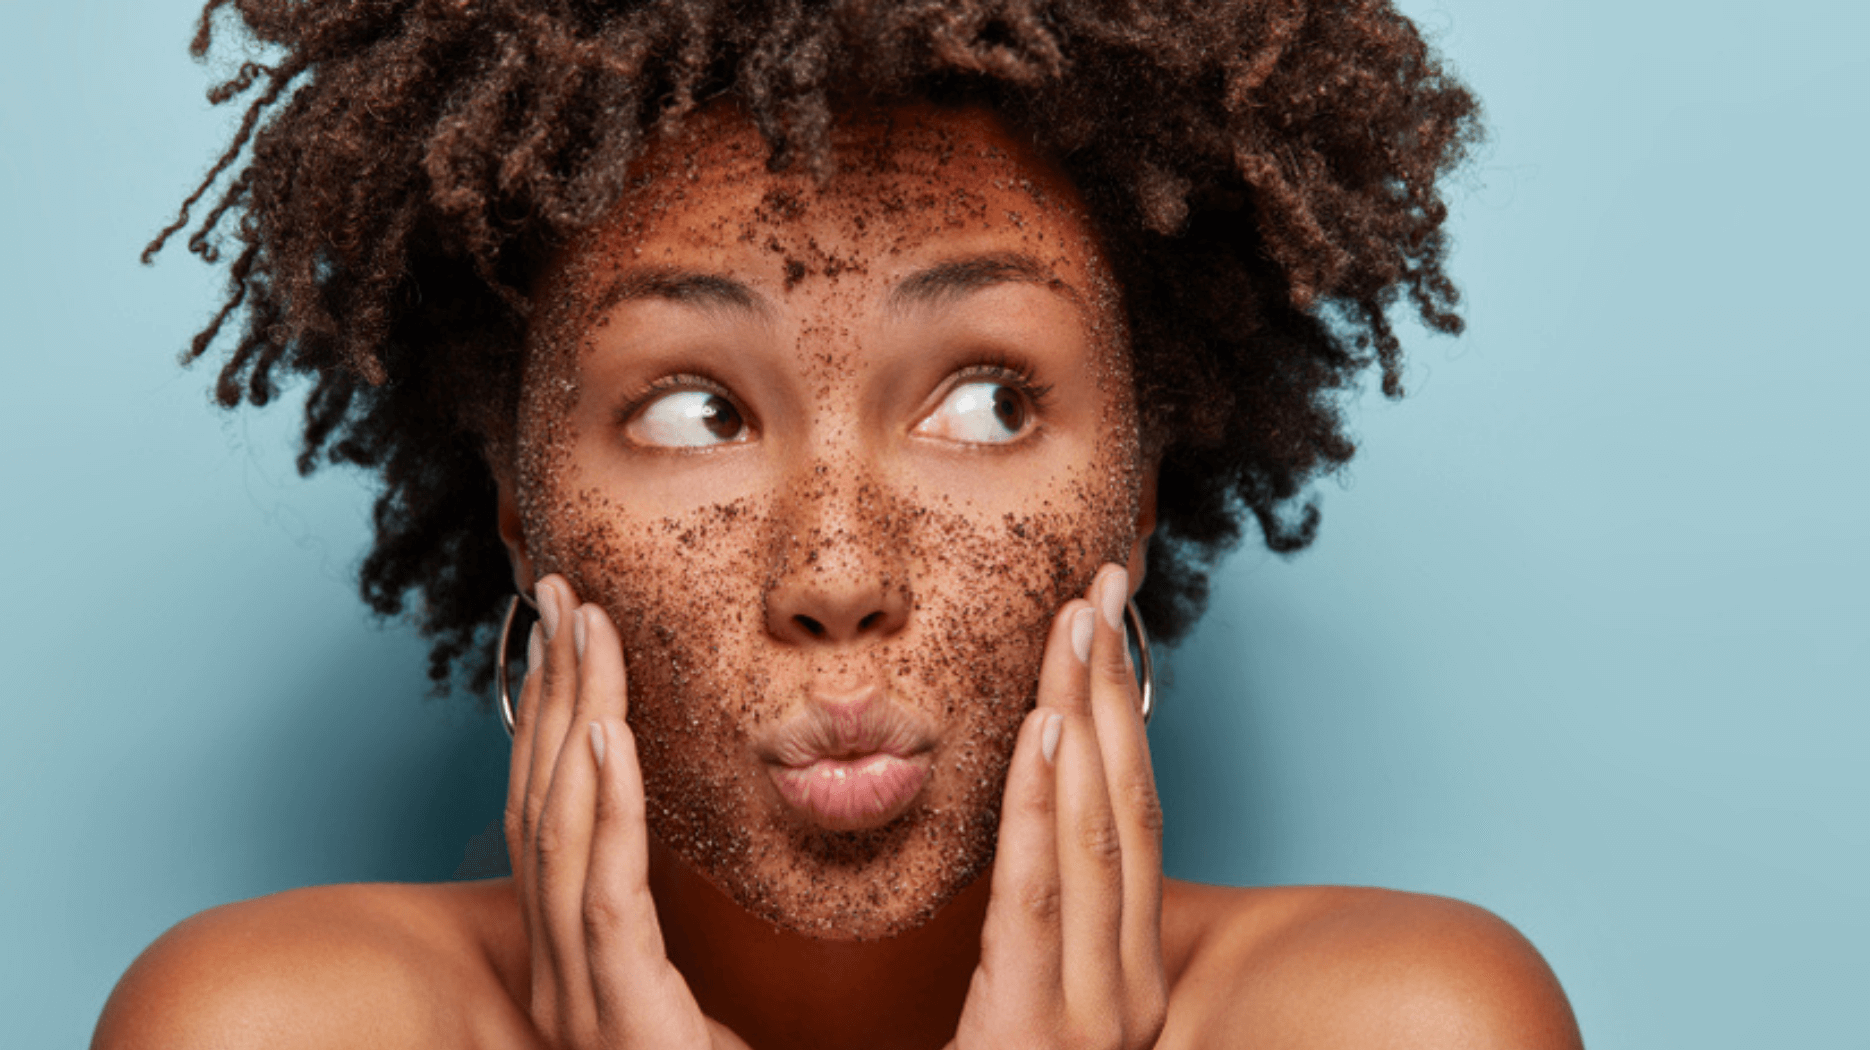 Are You Using the Best Face Exfoliator?